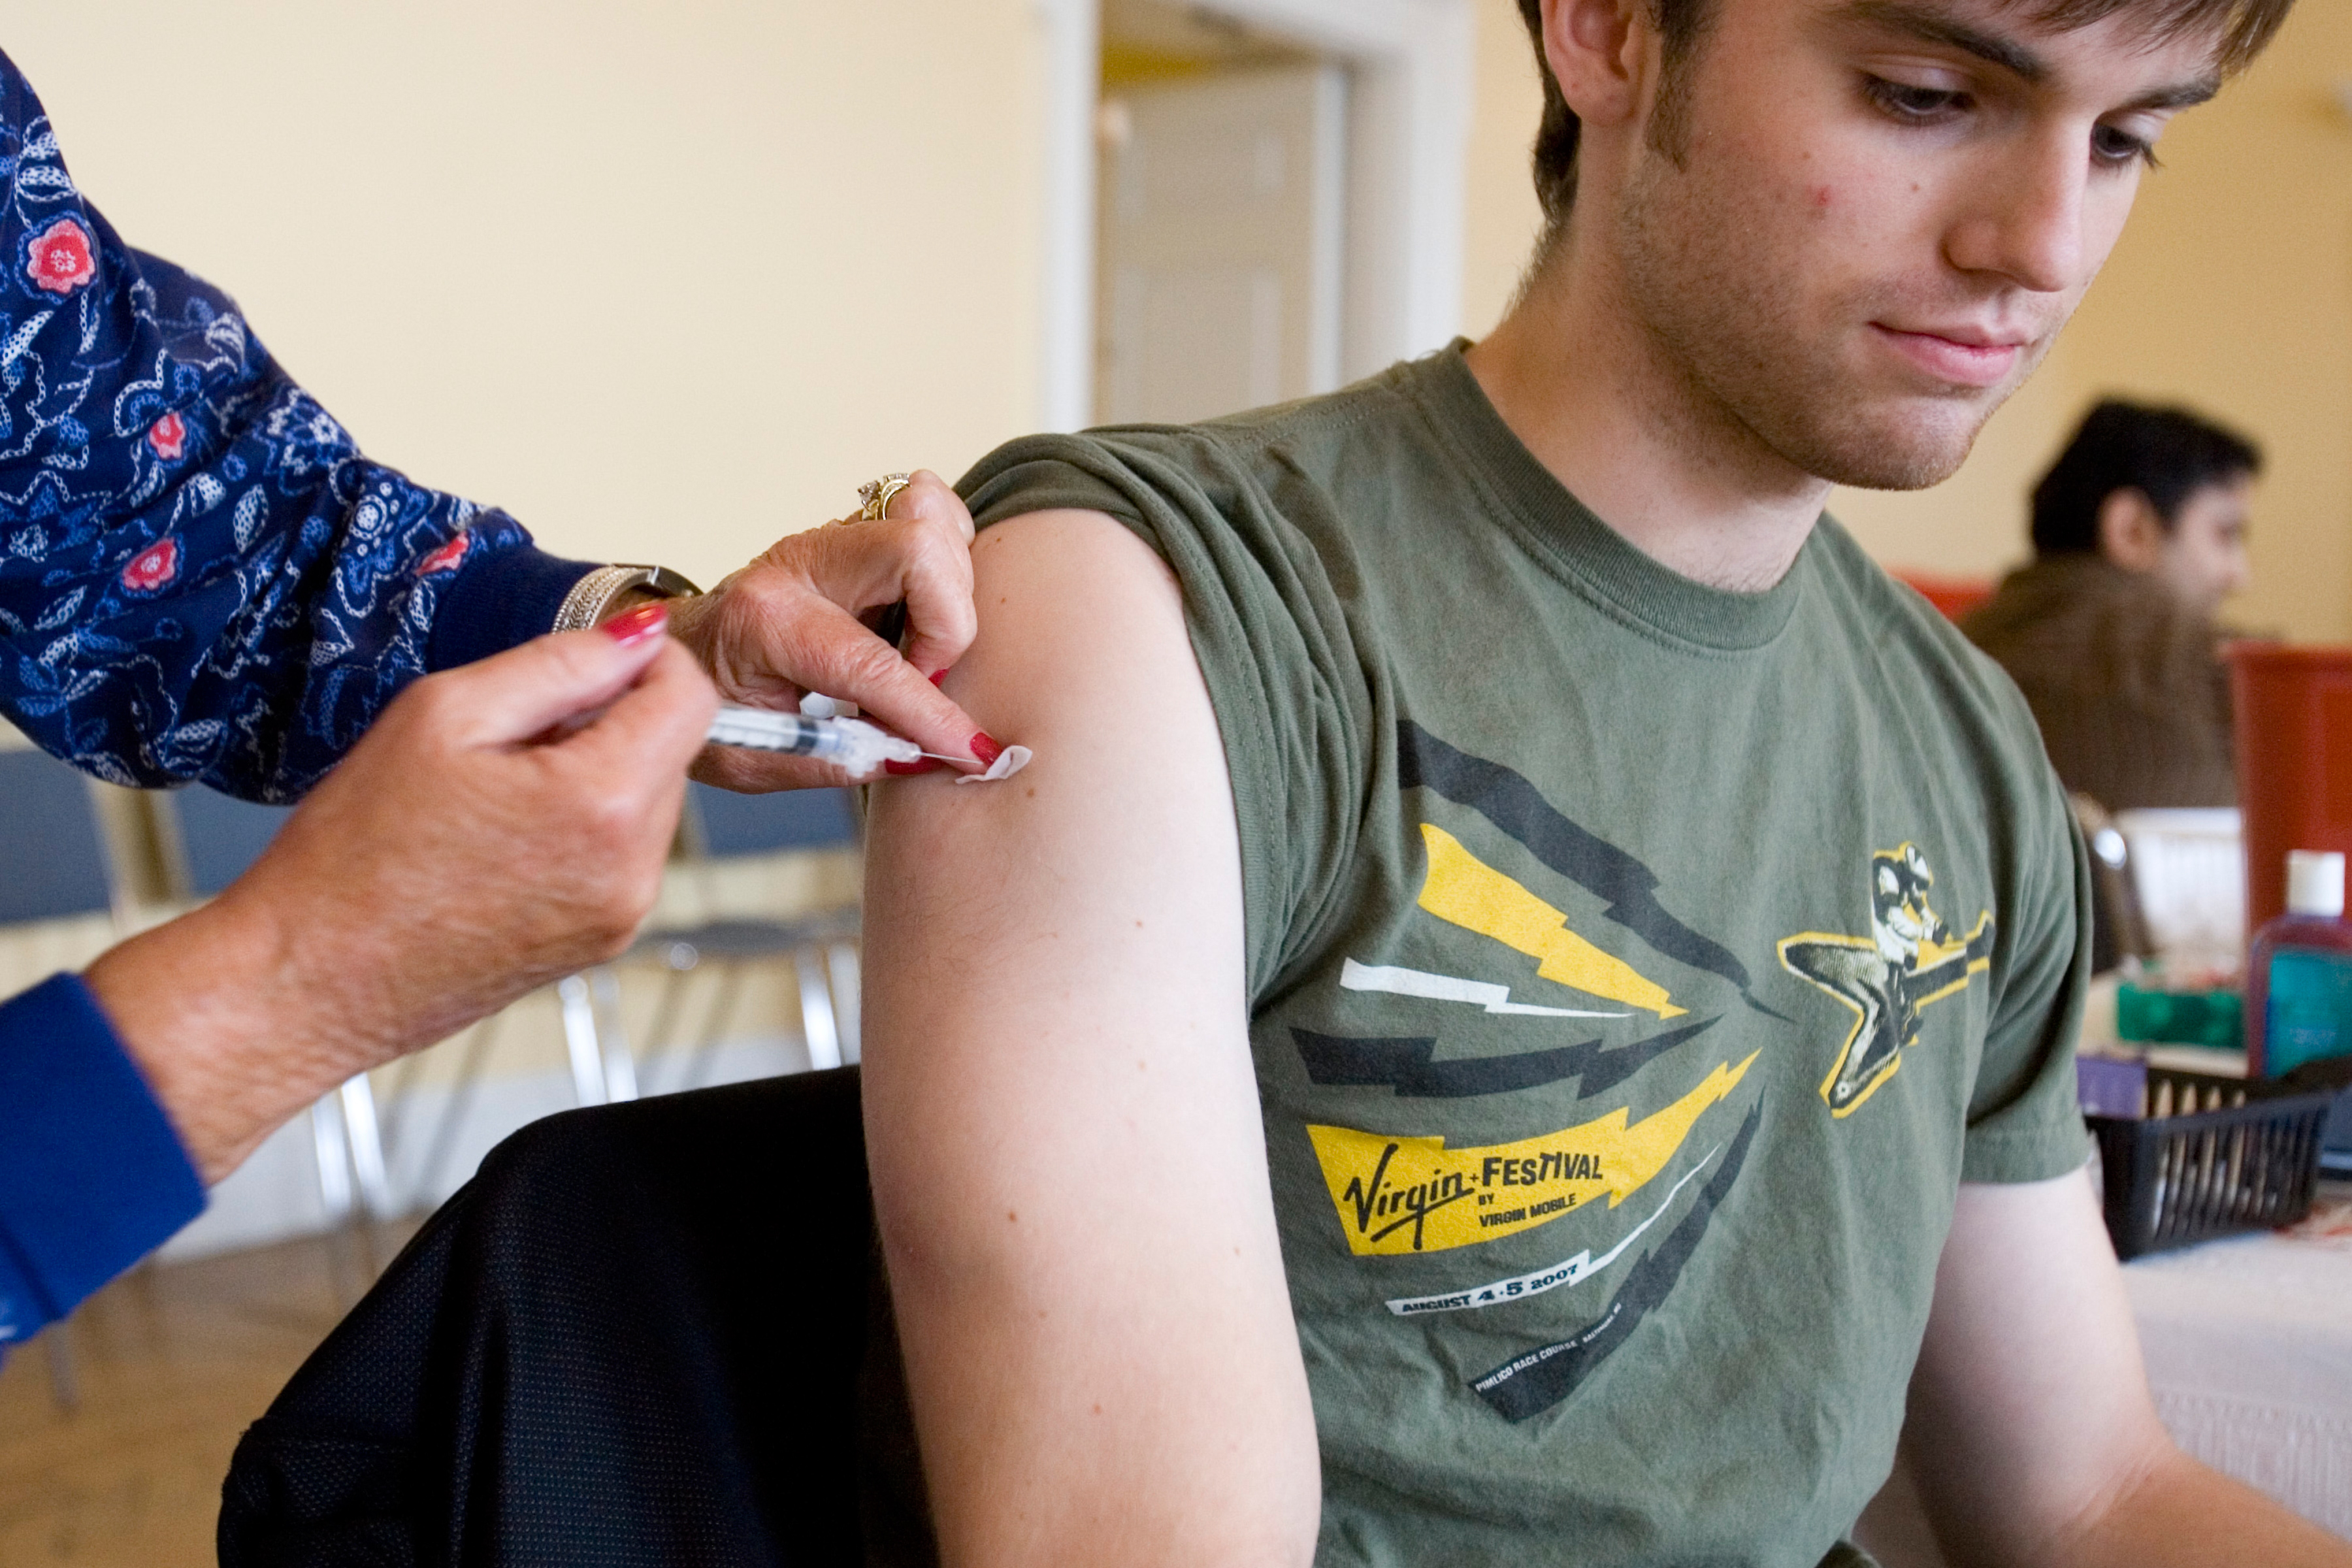 Student getting a vaccine from a nurse